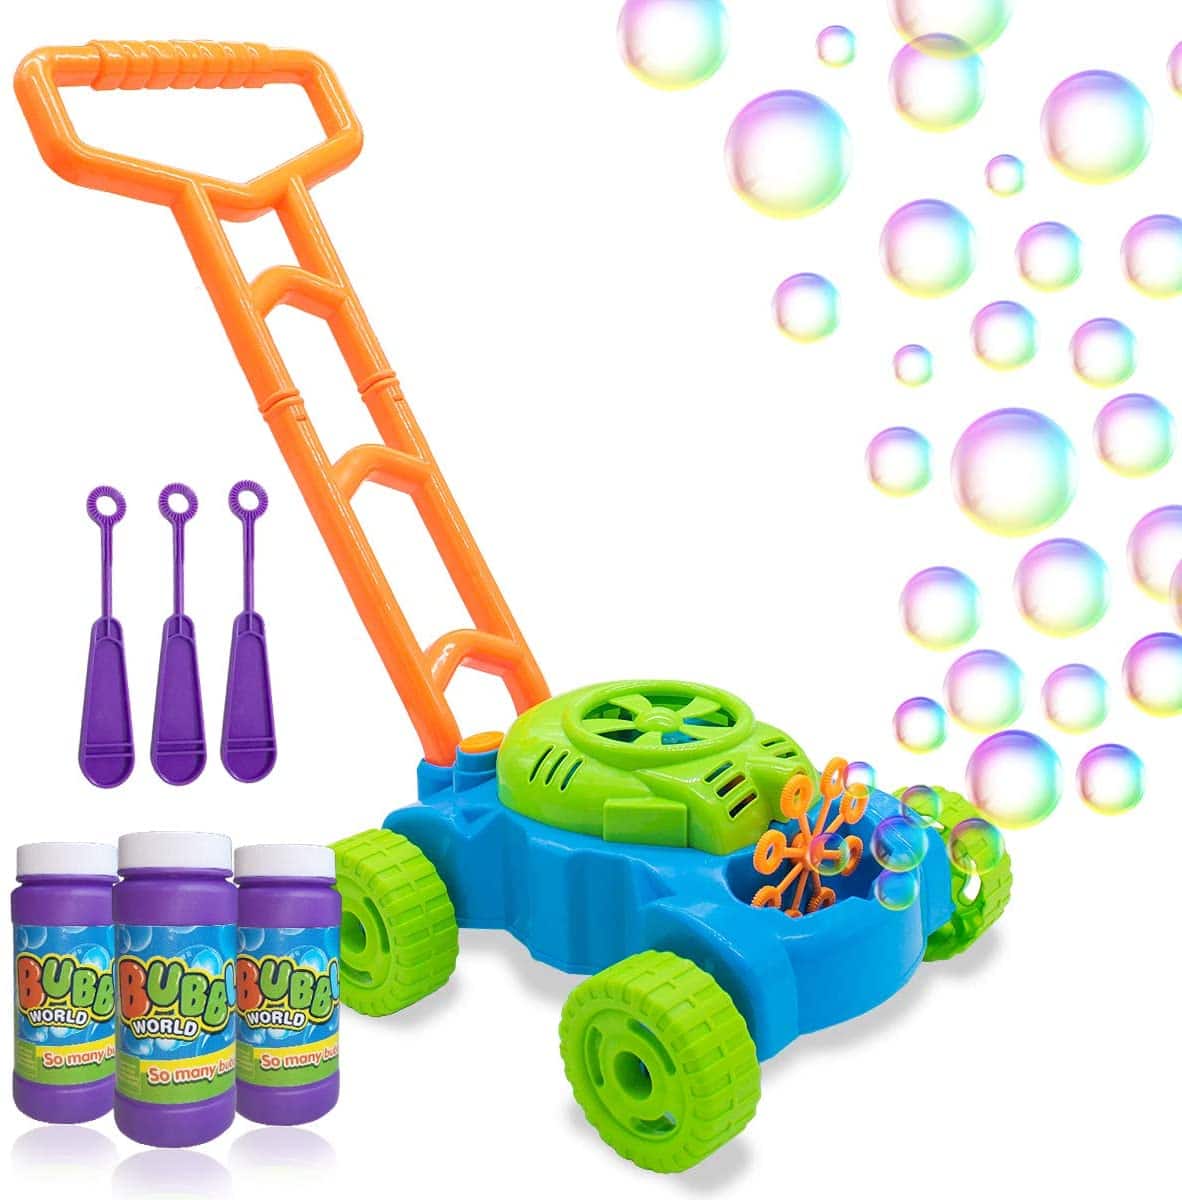 Outdoor Toys for Toddlers